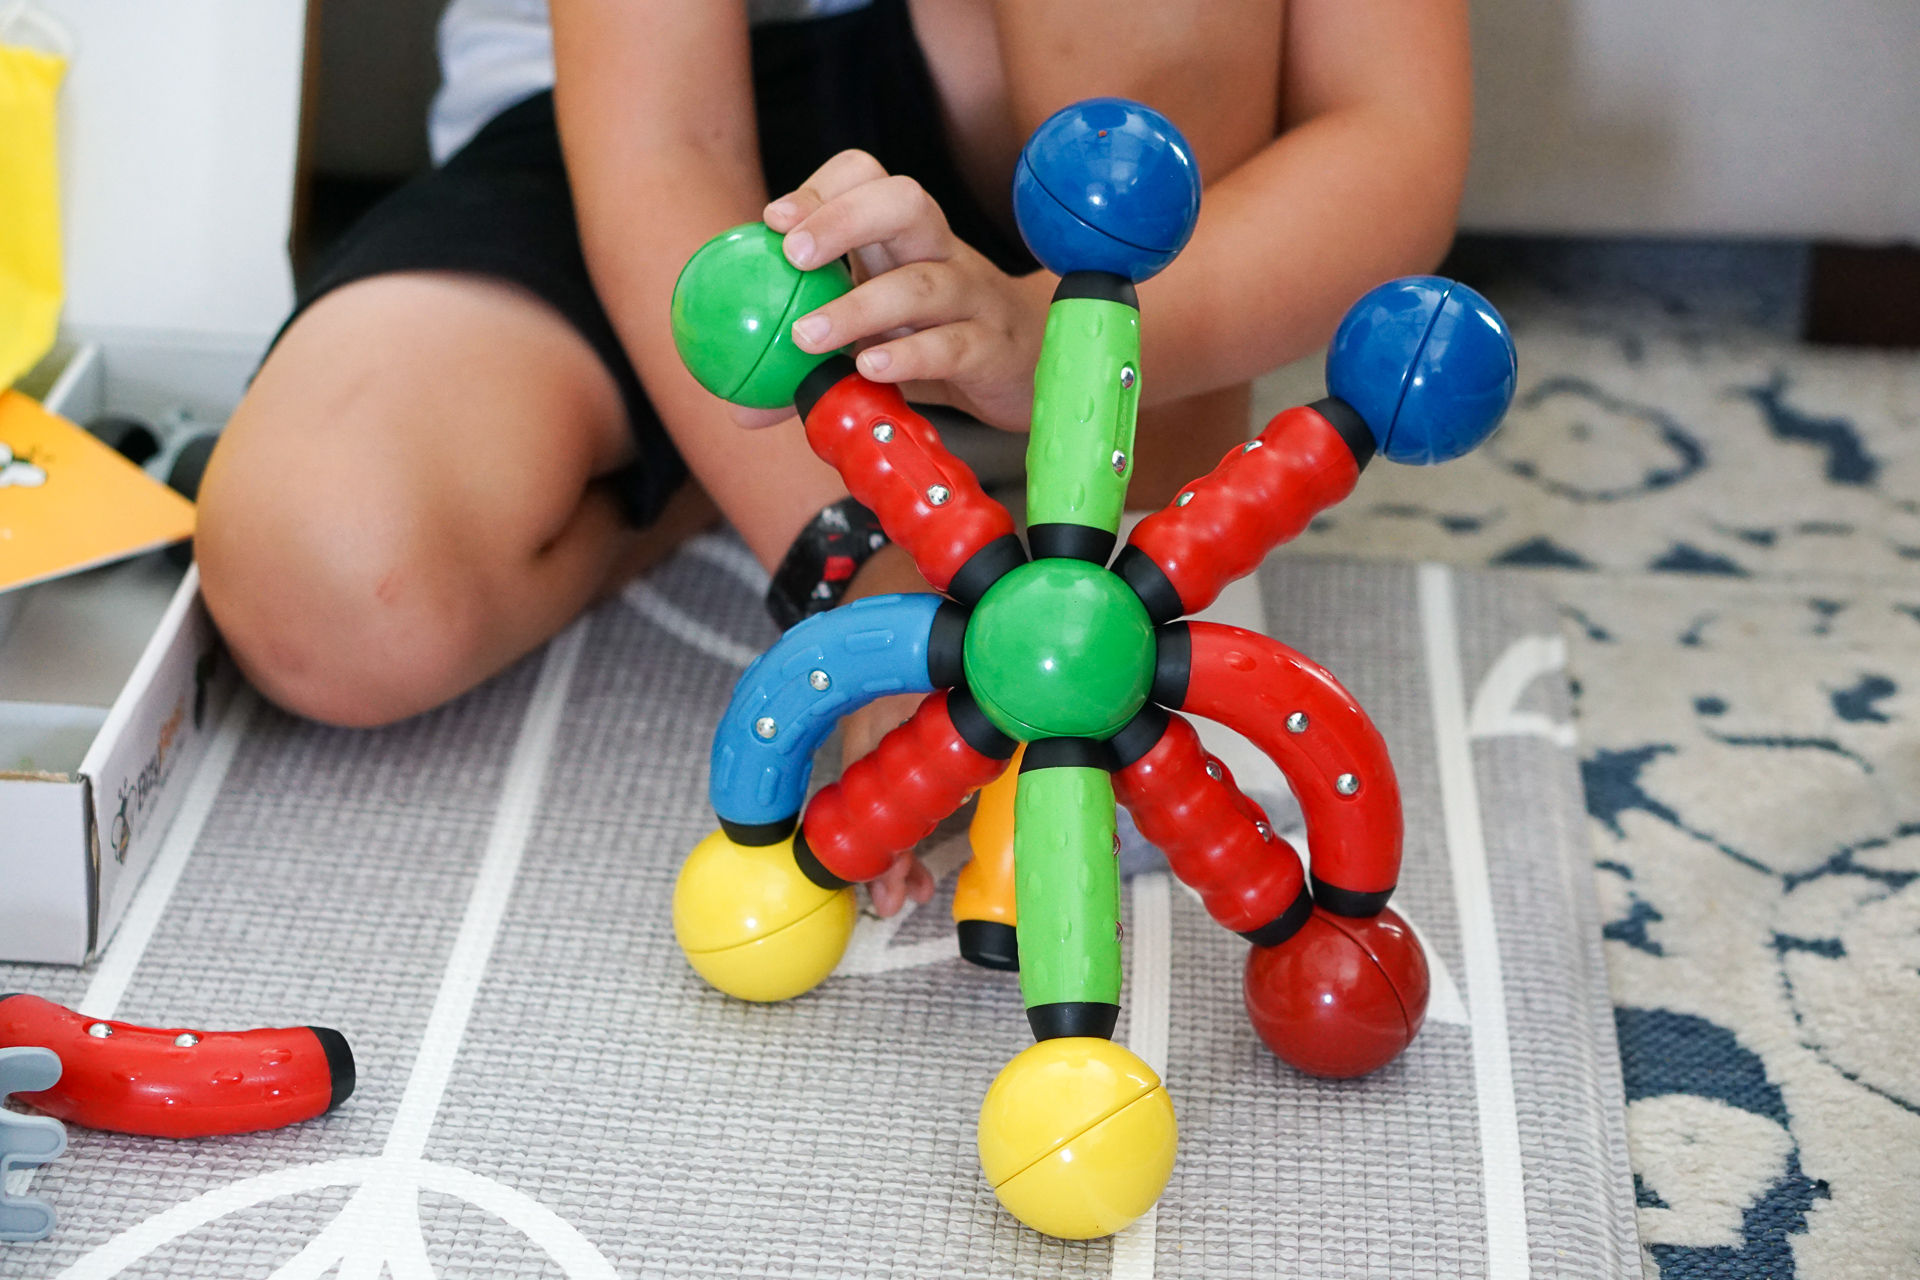 Magnetic Toys for STEAM and STEM Learning and Sensory Play - MagStix Building Set